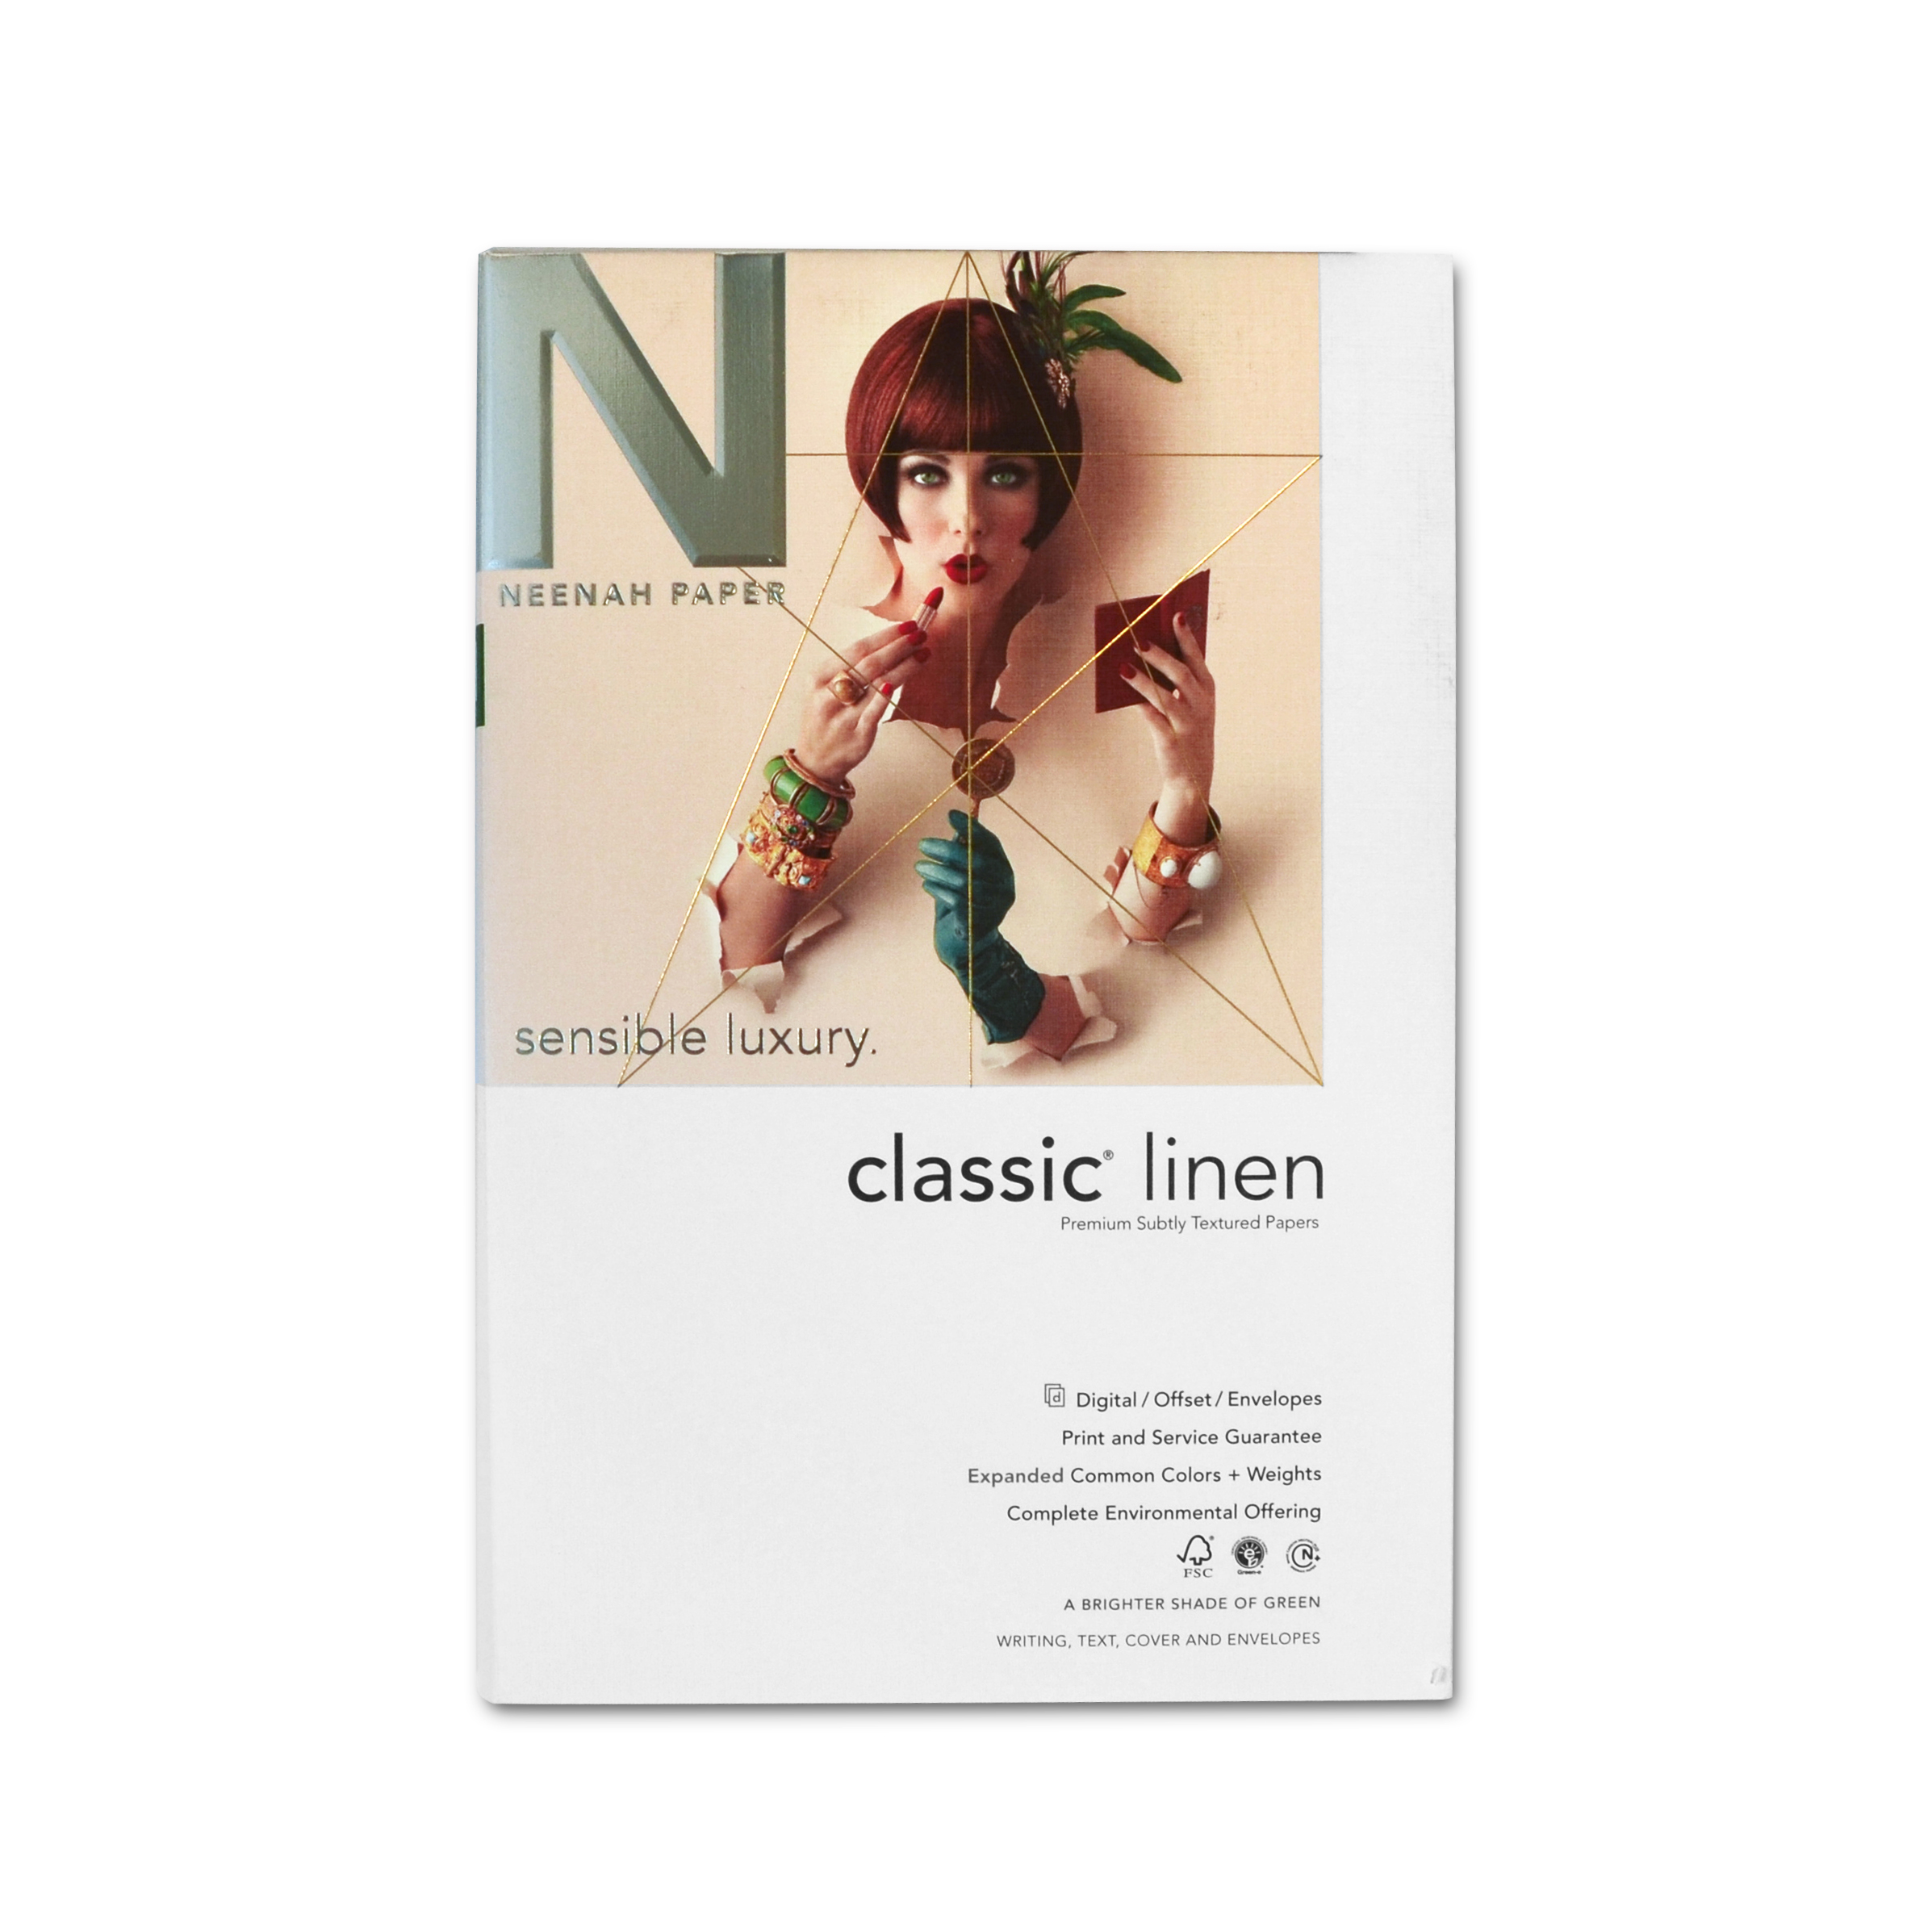 CLASSIC Linen - Neenah Paper Text Paper and Cover Paper Sample Swatchbook and Professional Graphics 